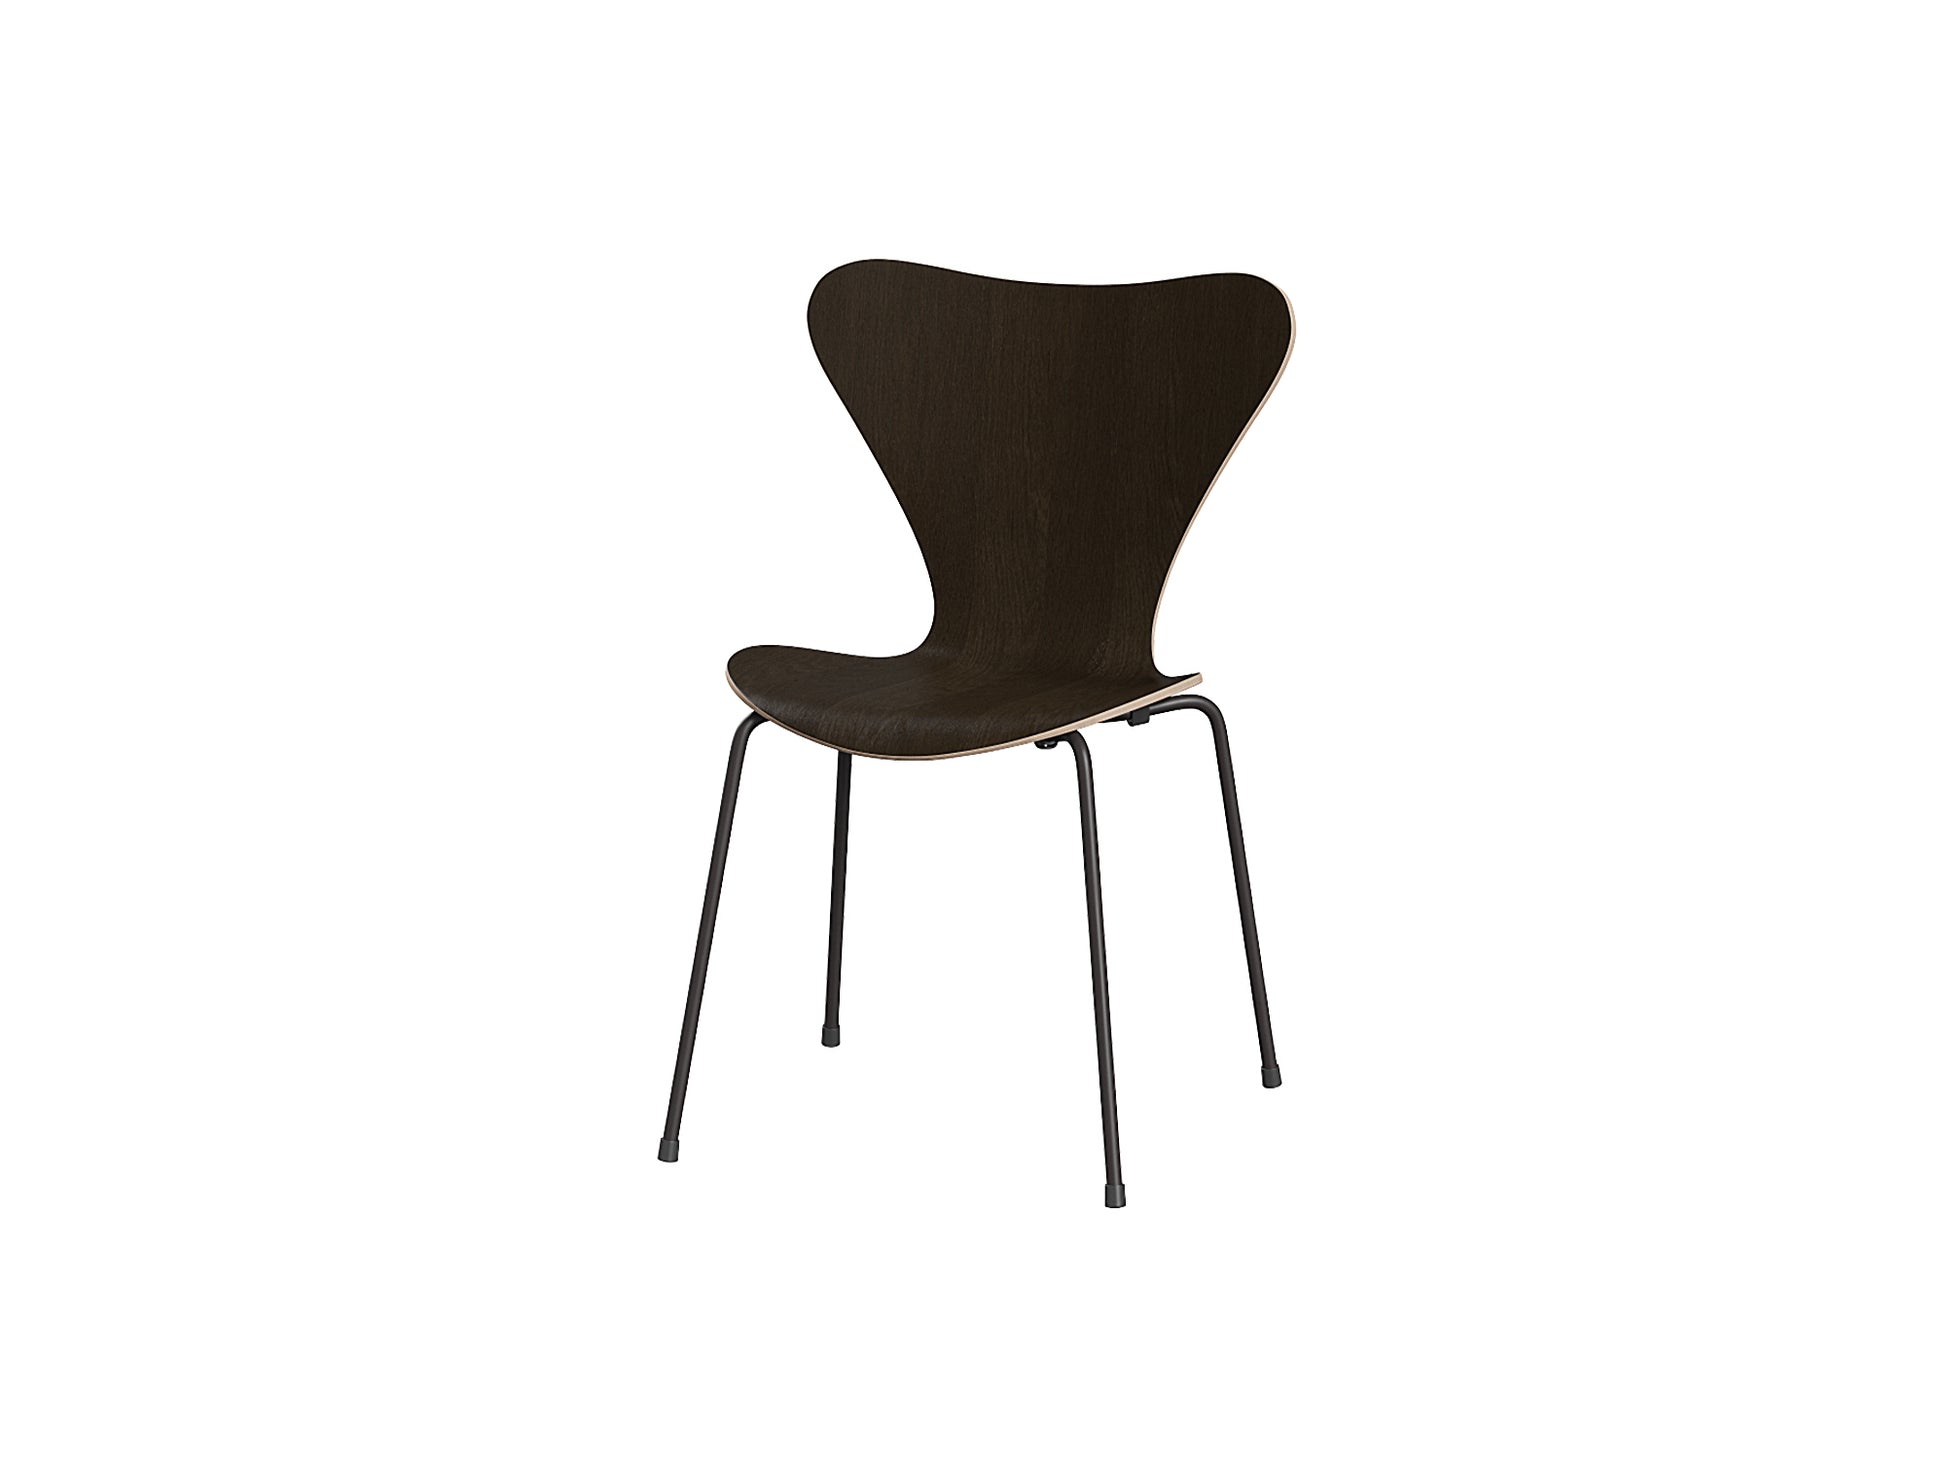 Series 7 Dining Chair (Clear Lacquered Wood) by Fritz Hanse - Dark Stained Oak / Warm Graphite Steel